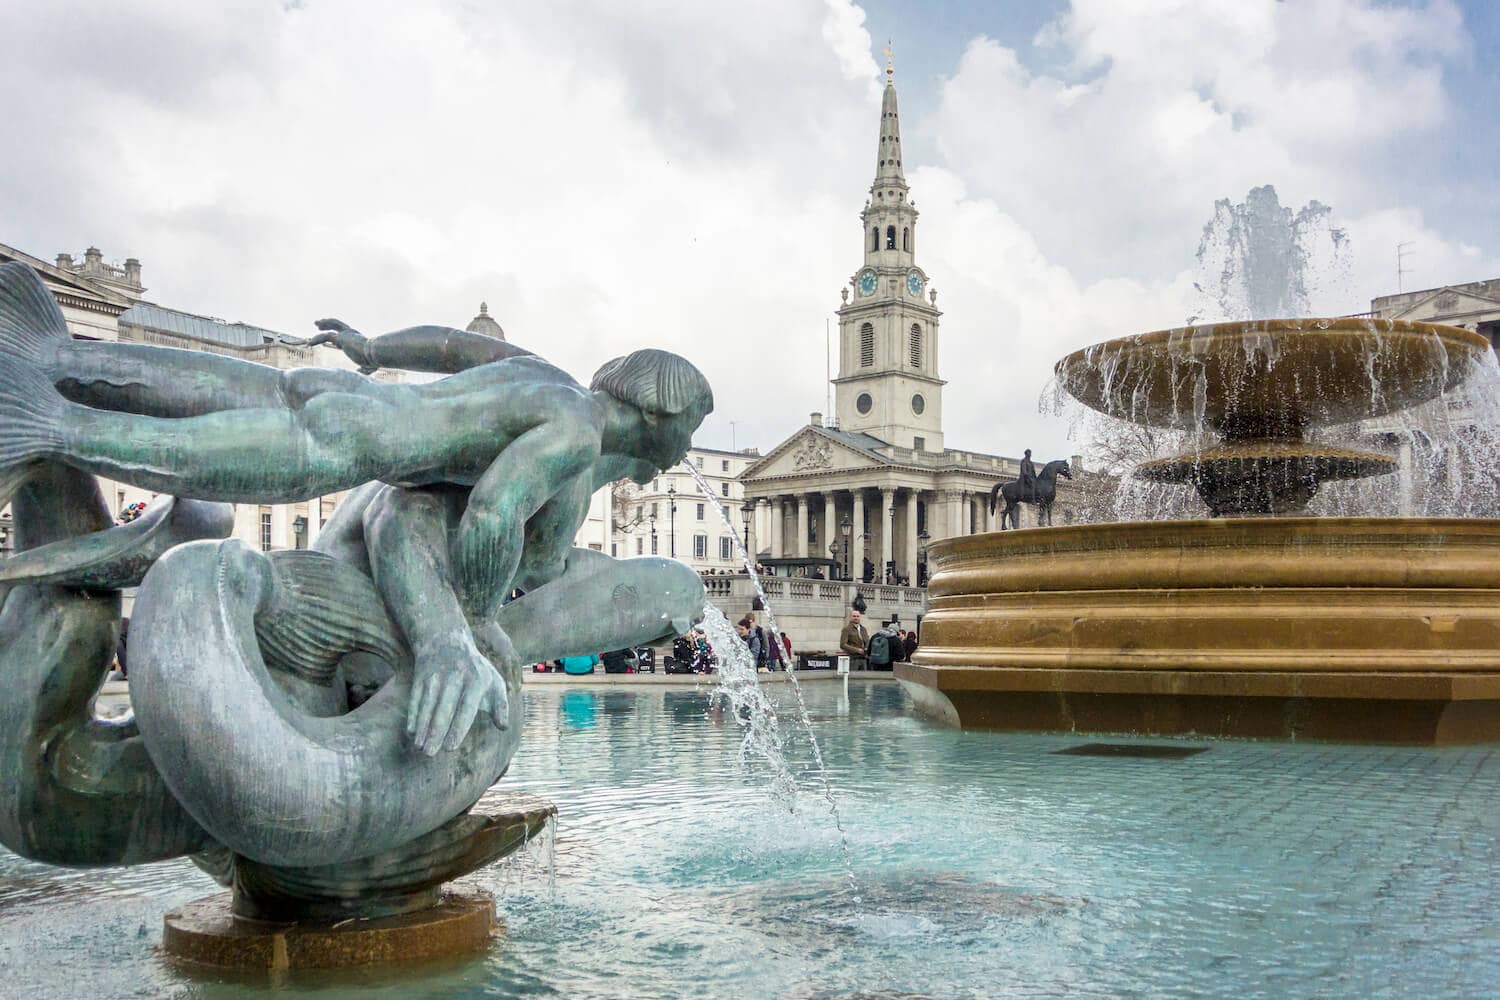 The fountain at Trafalager Square in London, England